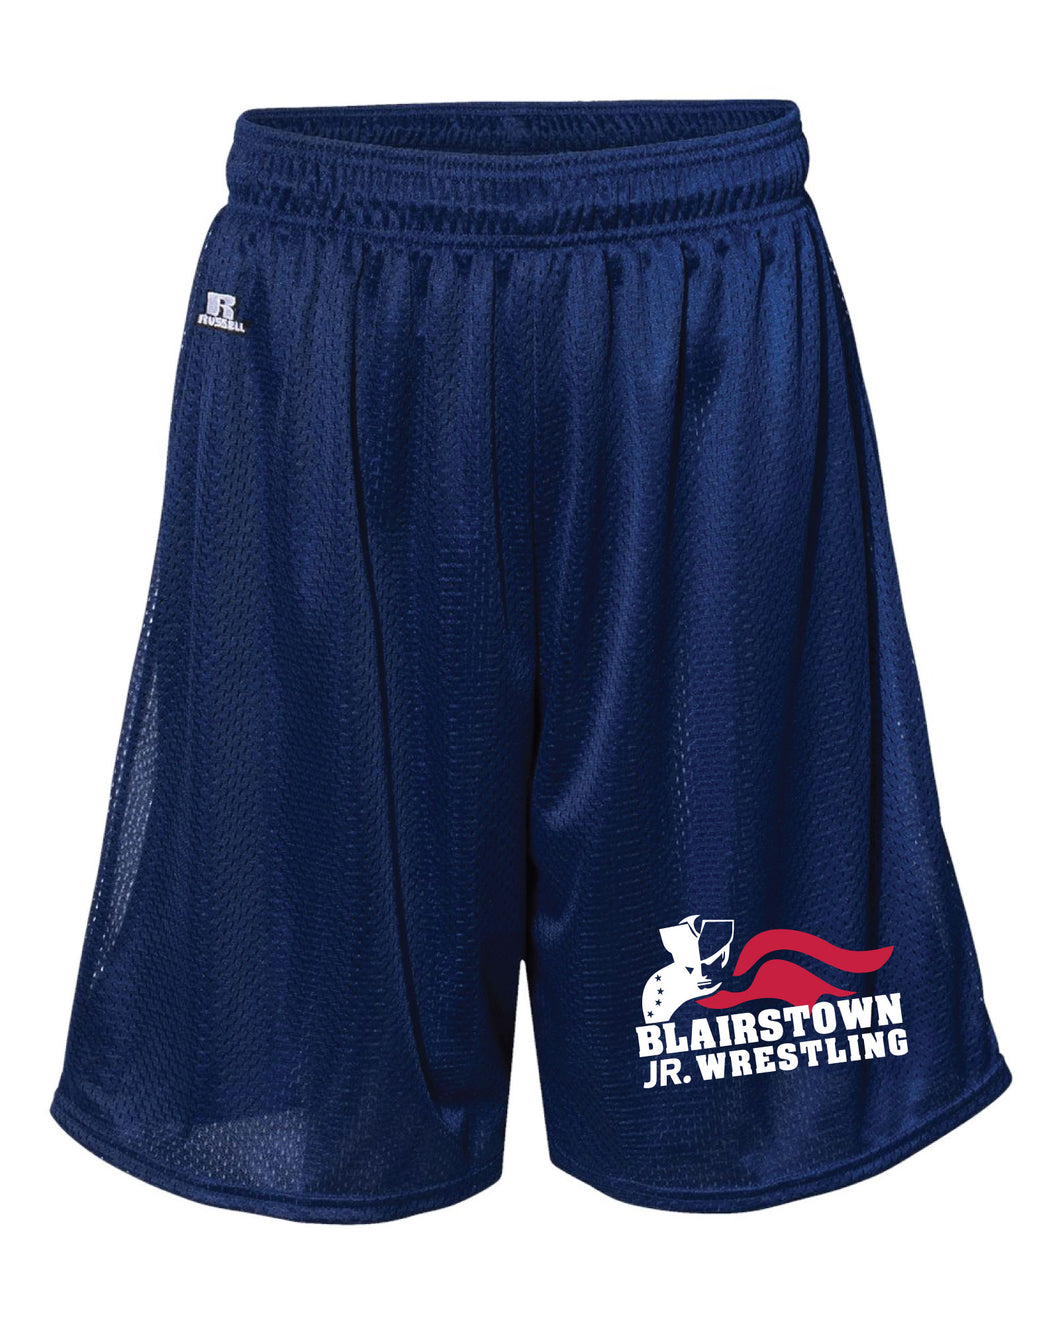 Blairstown Wrestling Russell Athletic Tech Shorts - Navy - 5KounT